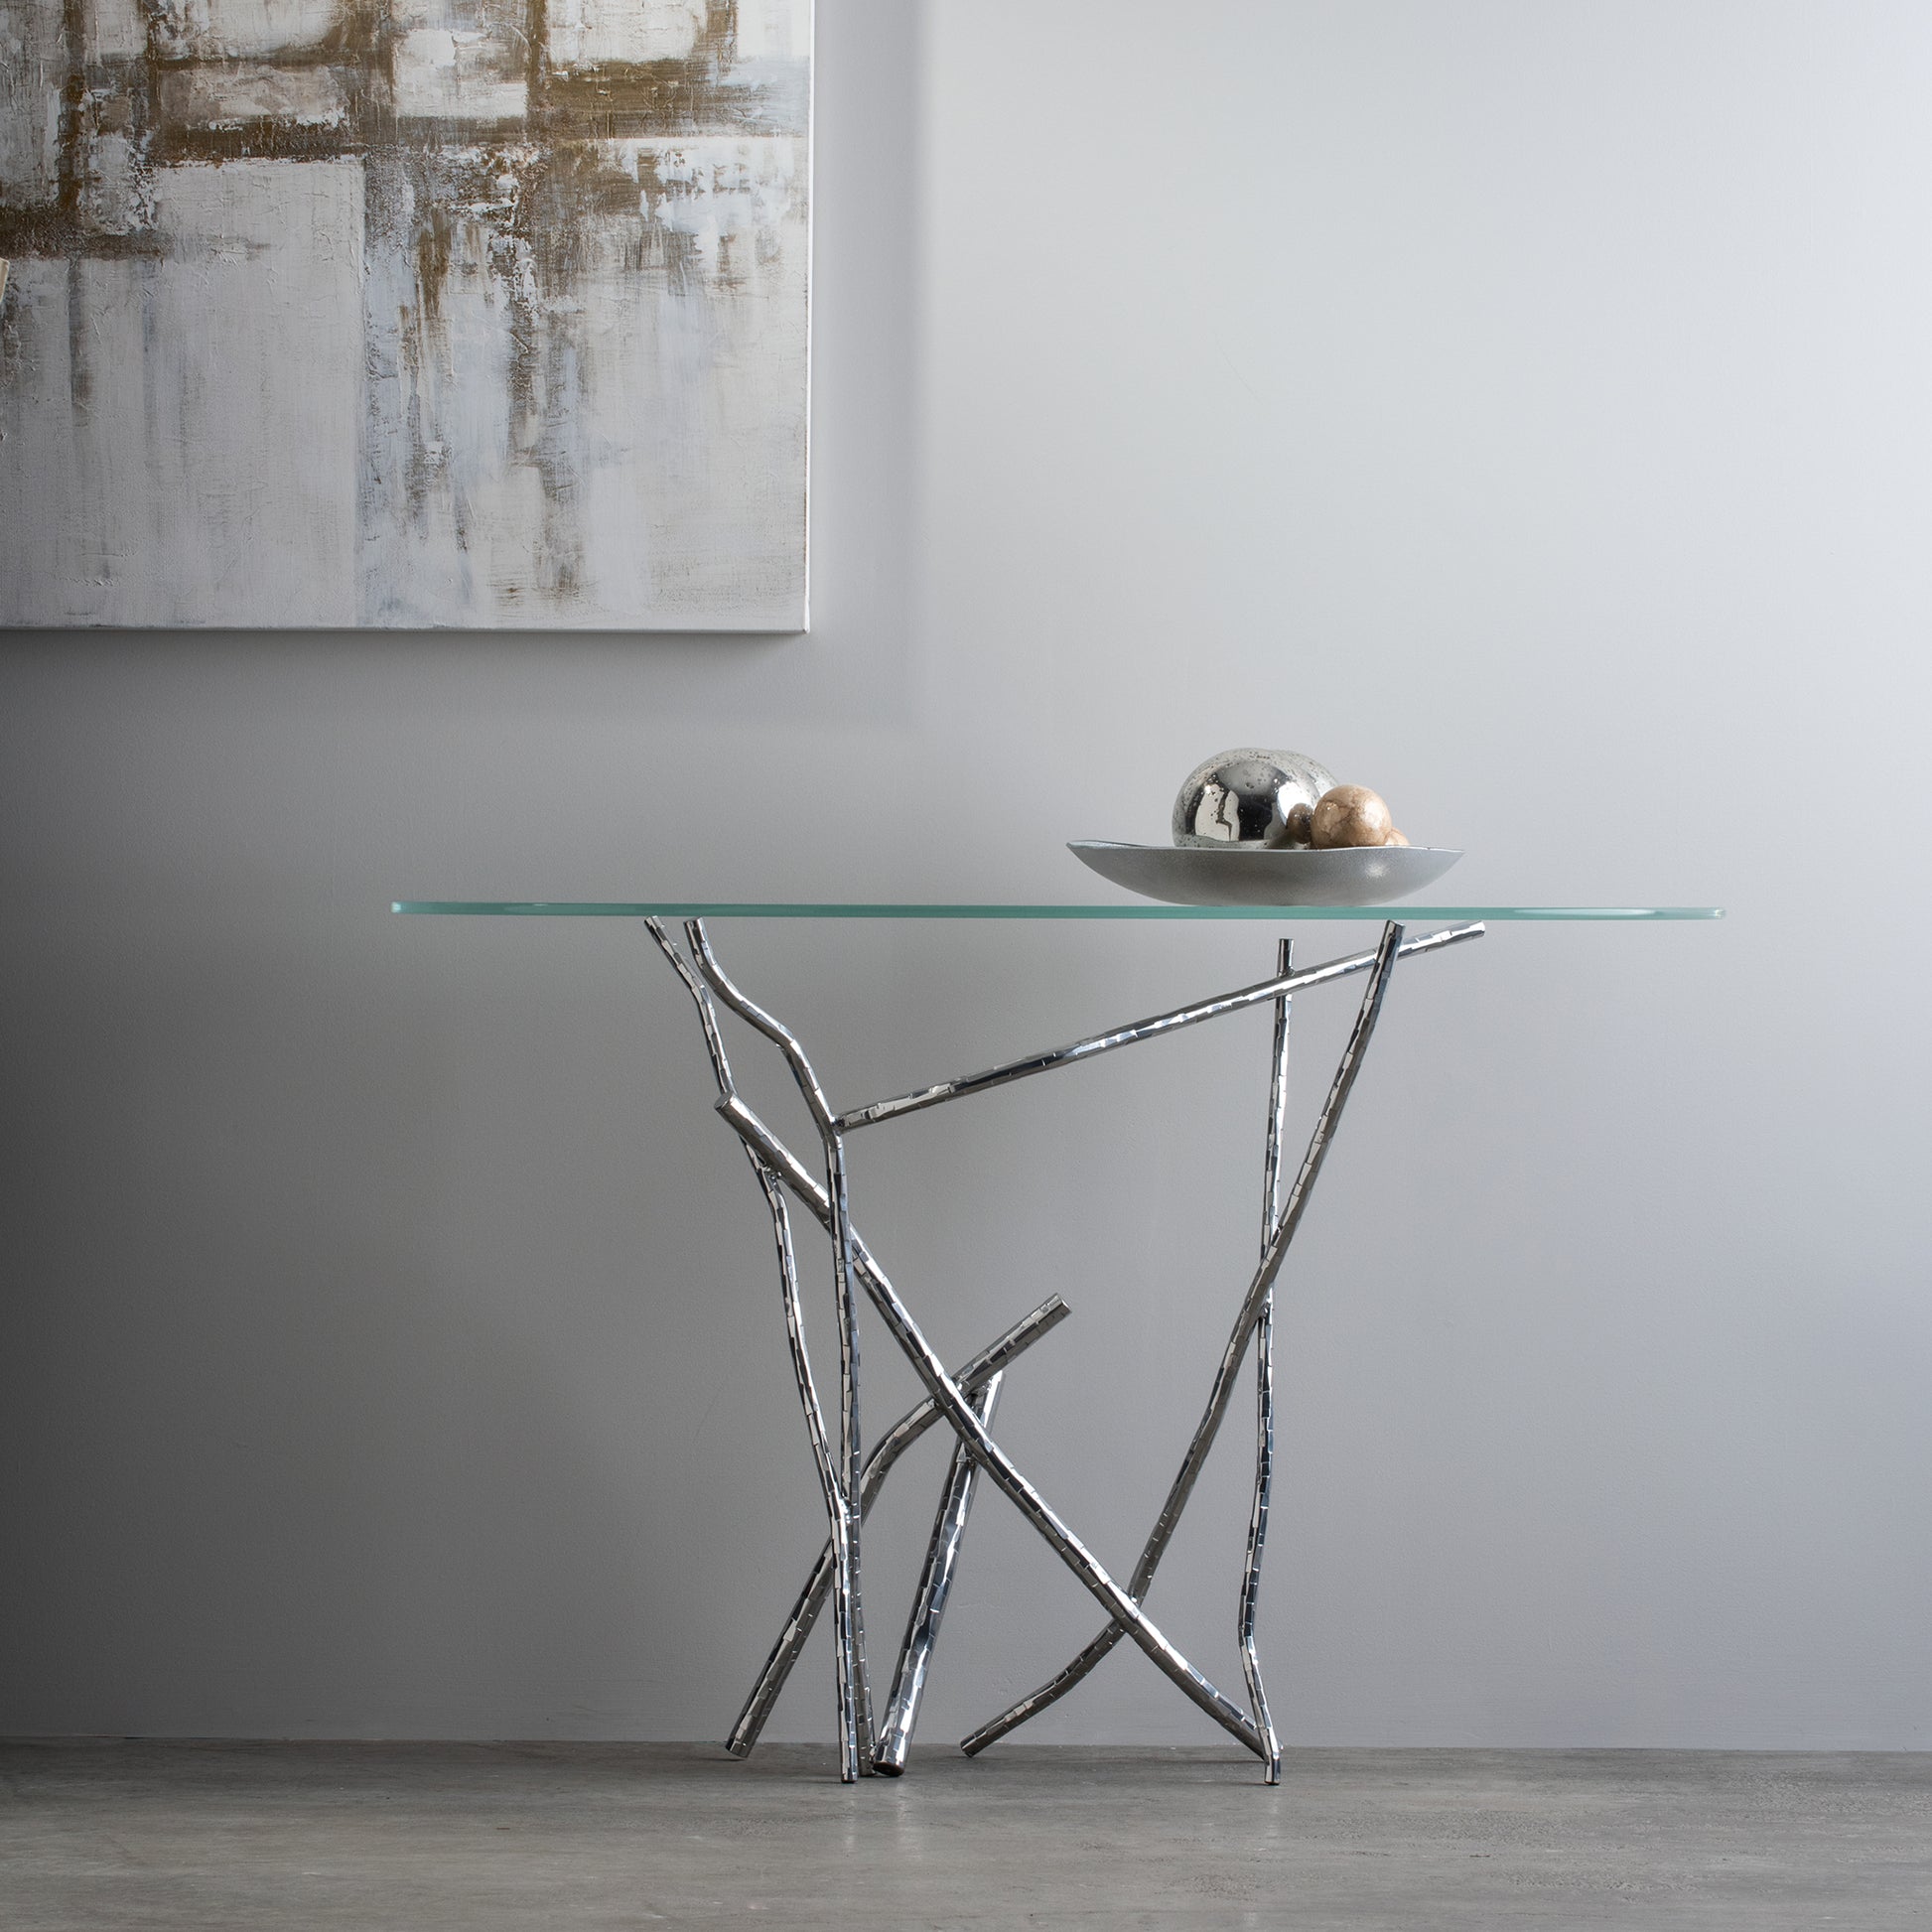 The Hubbardton Forge Brindille Console Table is a Hubbardton Forge Brindille Console Table featuring elegant branches adorning its glass surface.